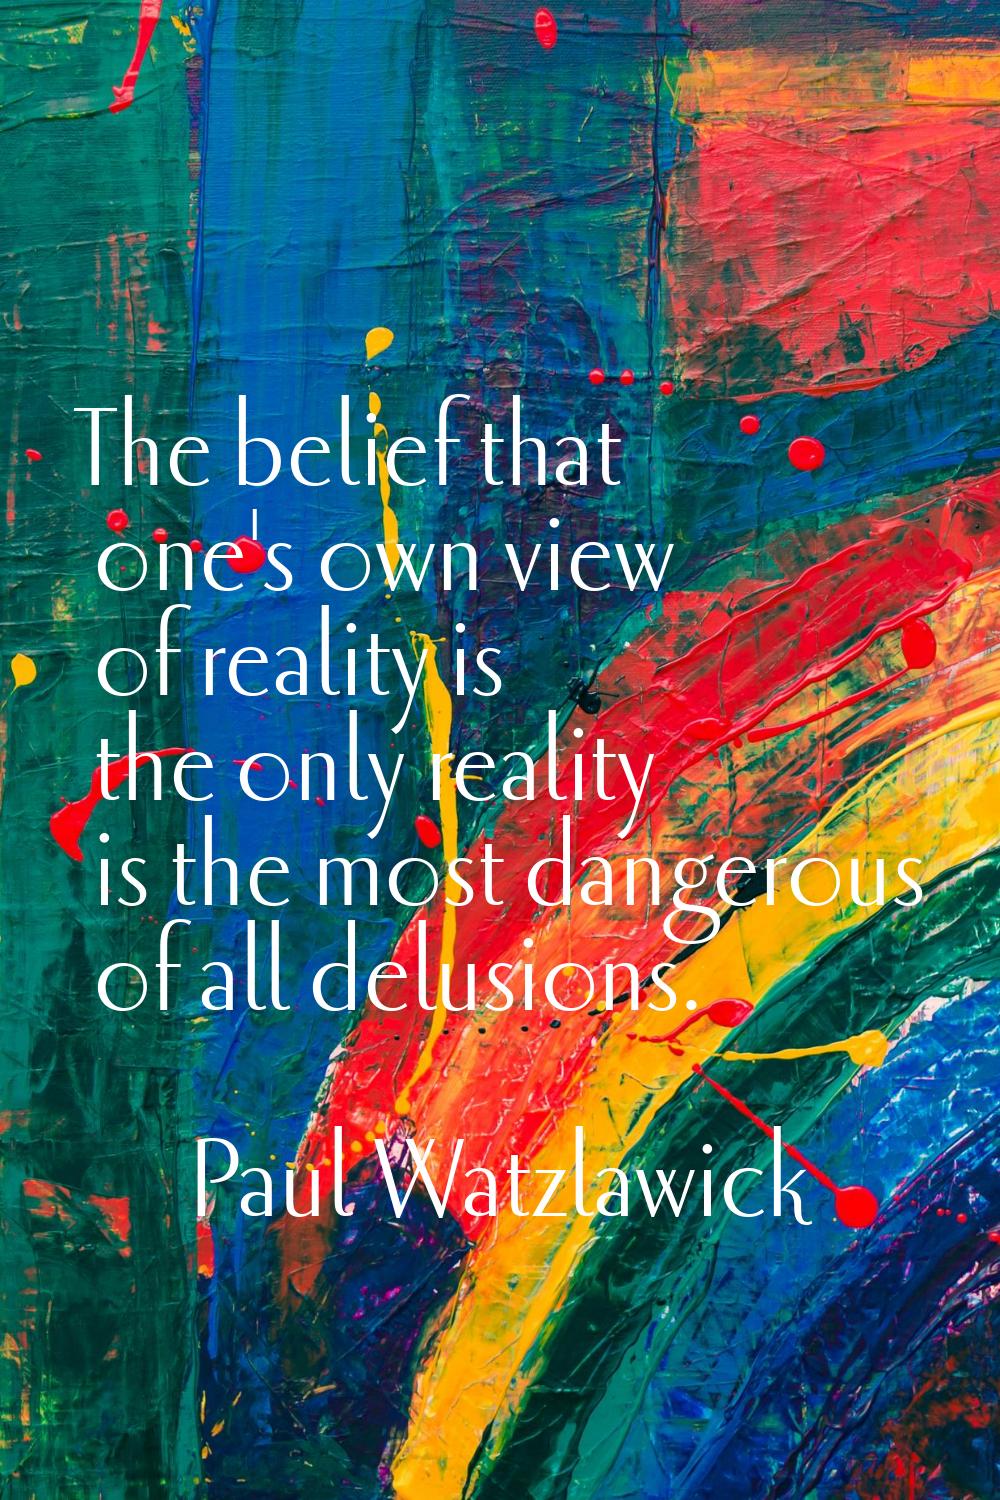 The belief that one's own view of reality is the only reality is the most dangerous of all delusion